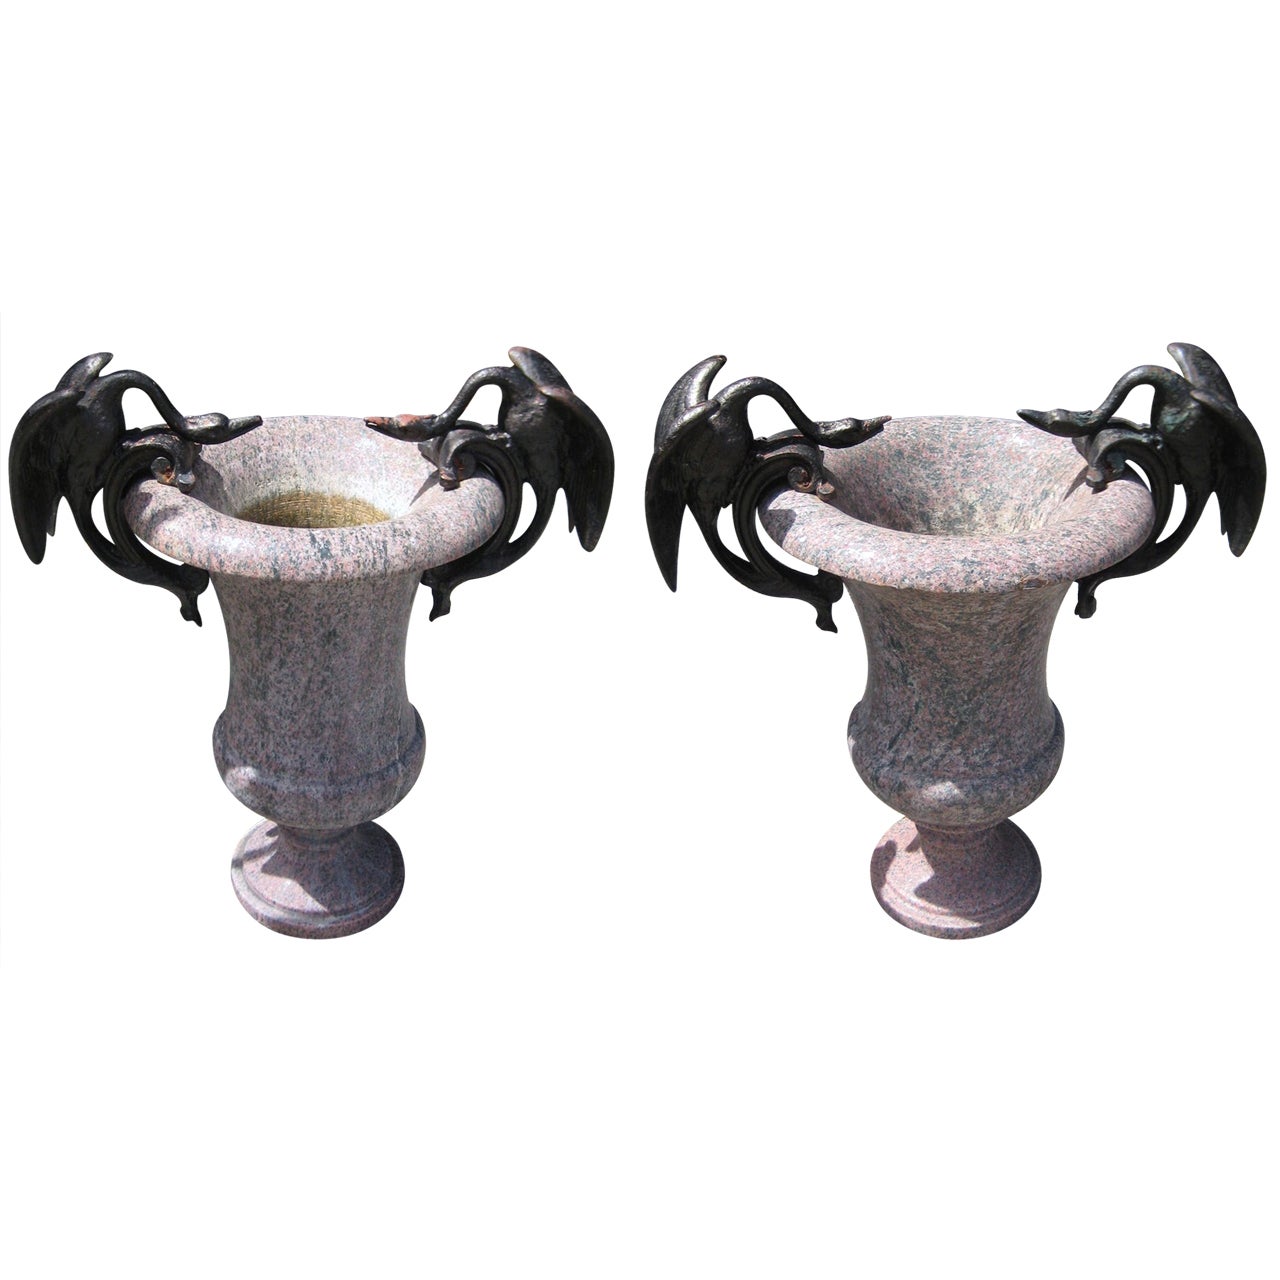 Pair of 19th Century Carved Granite Urns with Iron Swan Handles